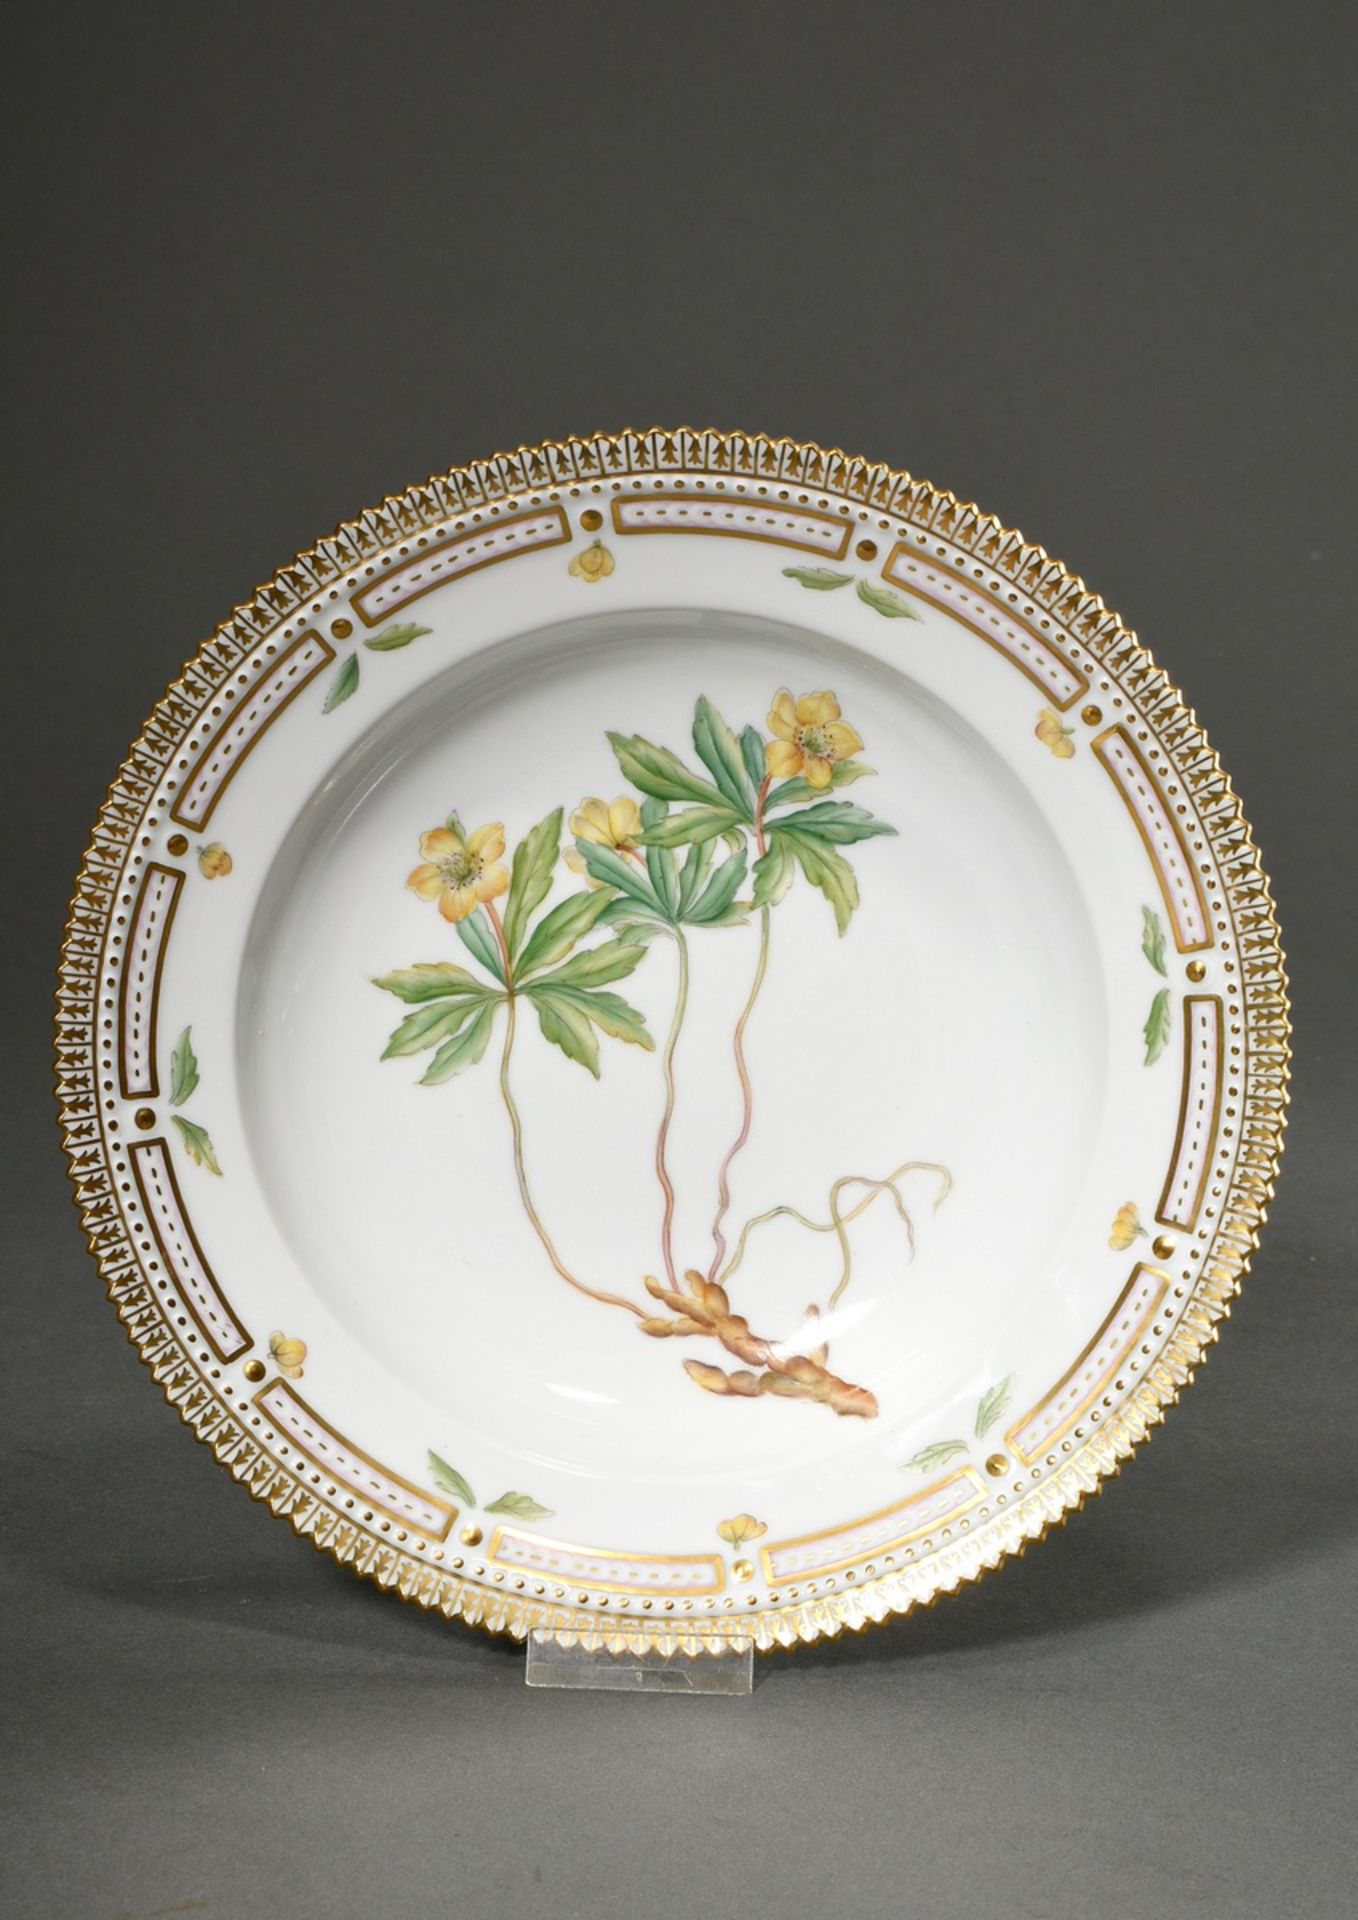 Royal Copenhagen "Flora Danica" soup plate with polychrome painting in the mirror, gold staffage an - Image 5 of 6